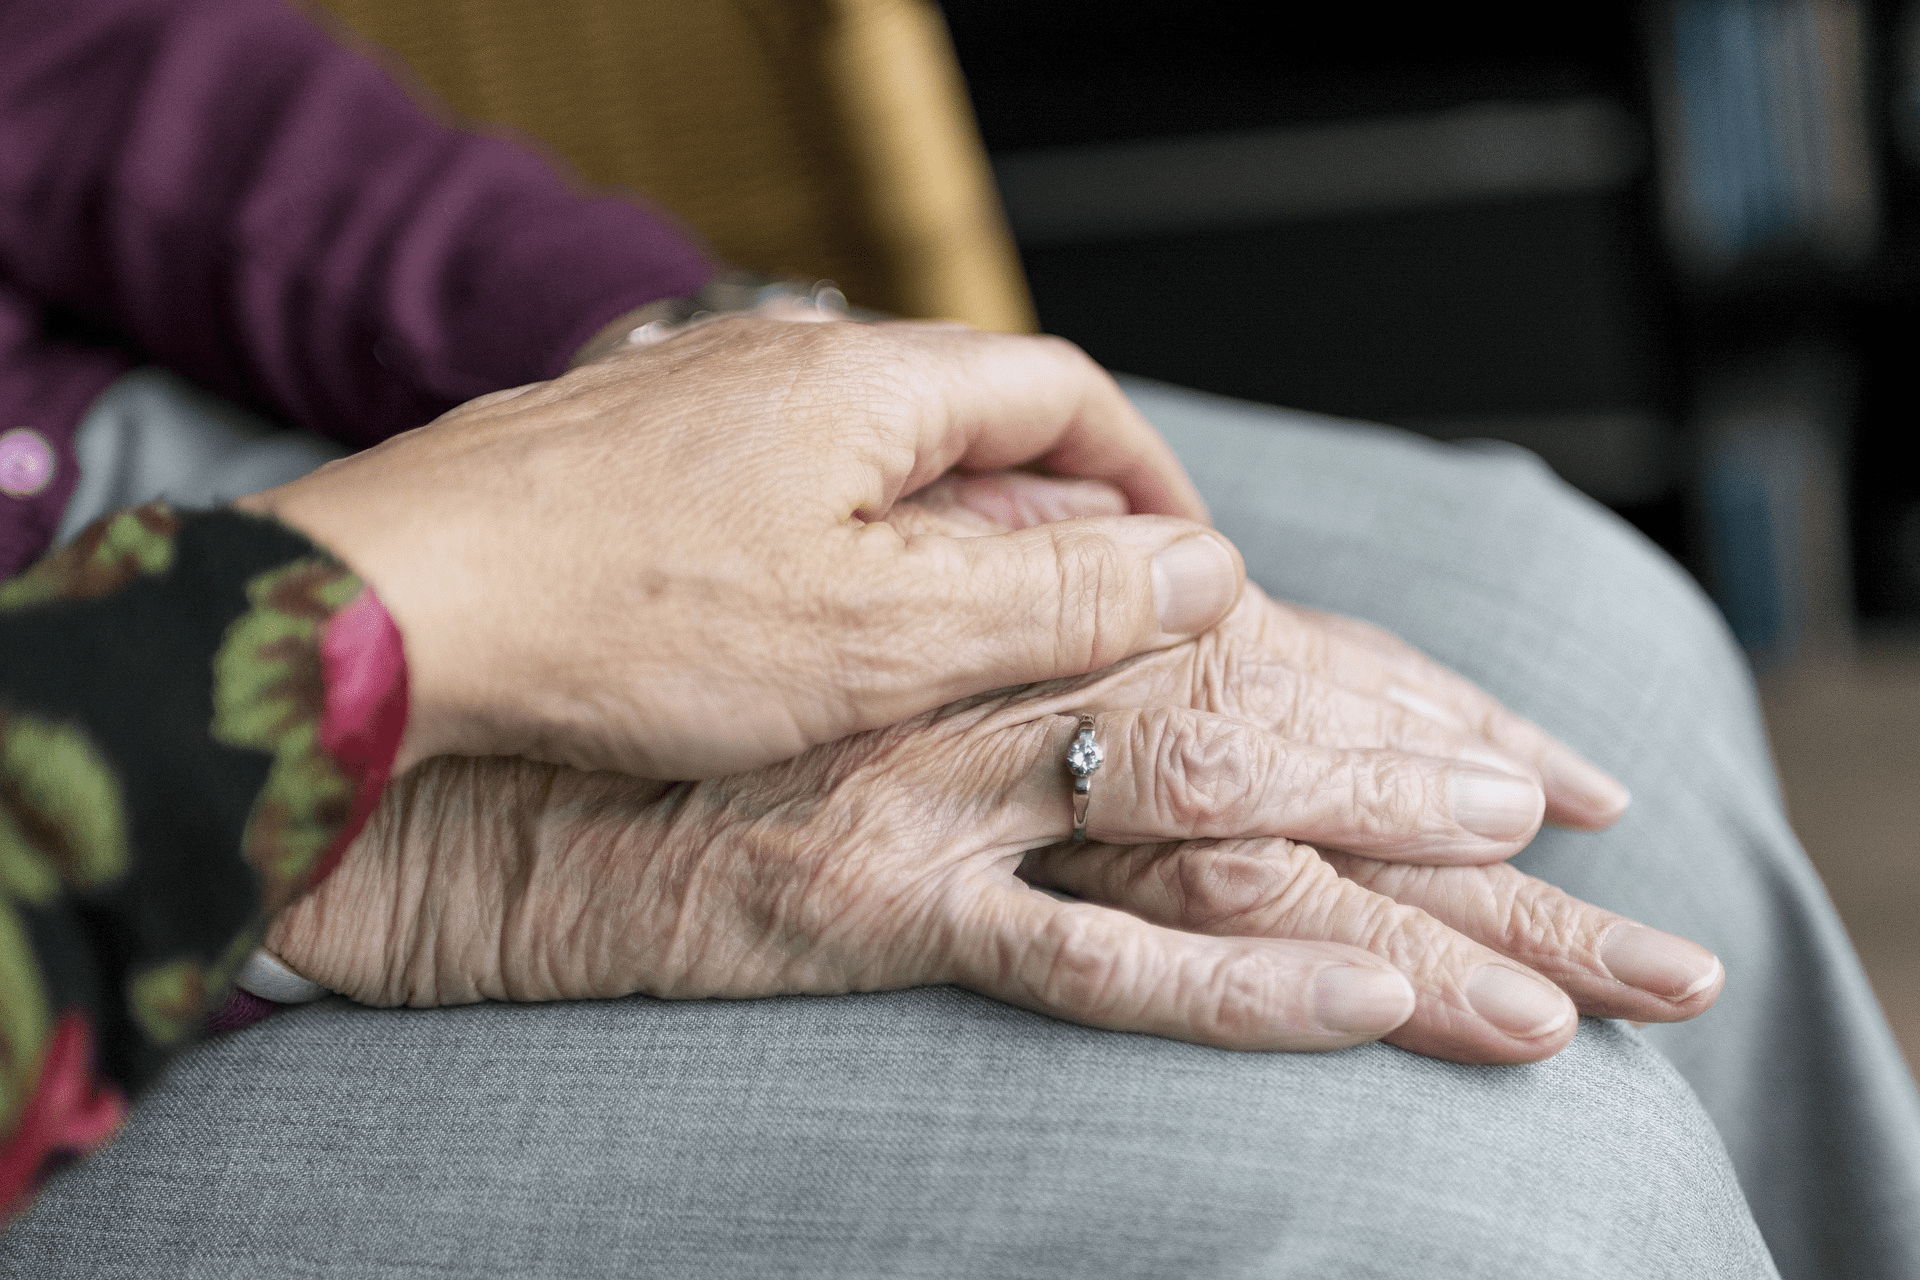 Every elderly has the right to access proper medical home care 